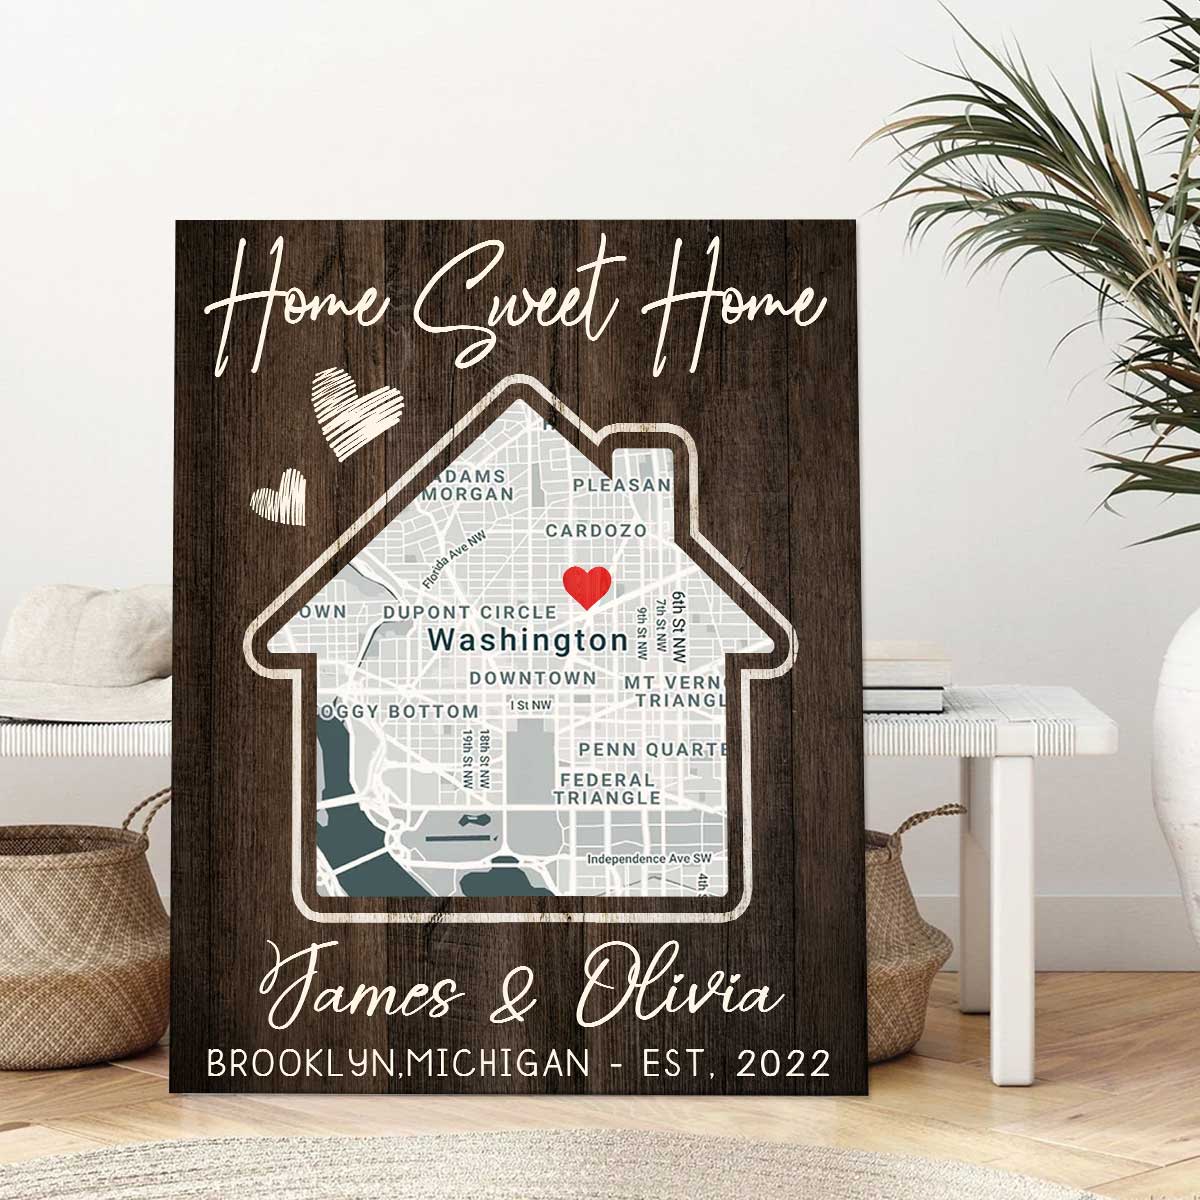 Personalized Housewarming Gifts - New Home Gift Ideas – A Gift Personalized